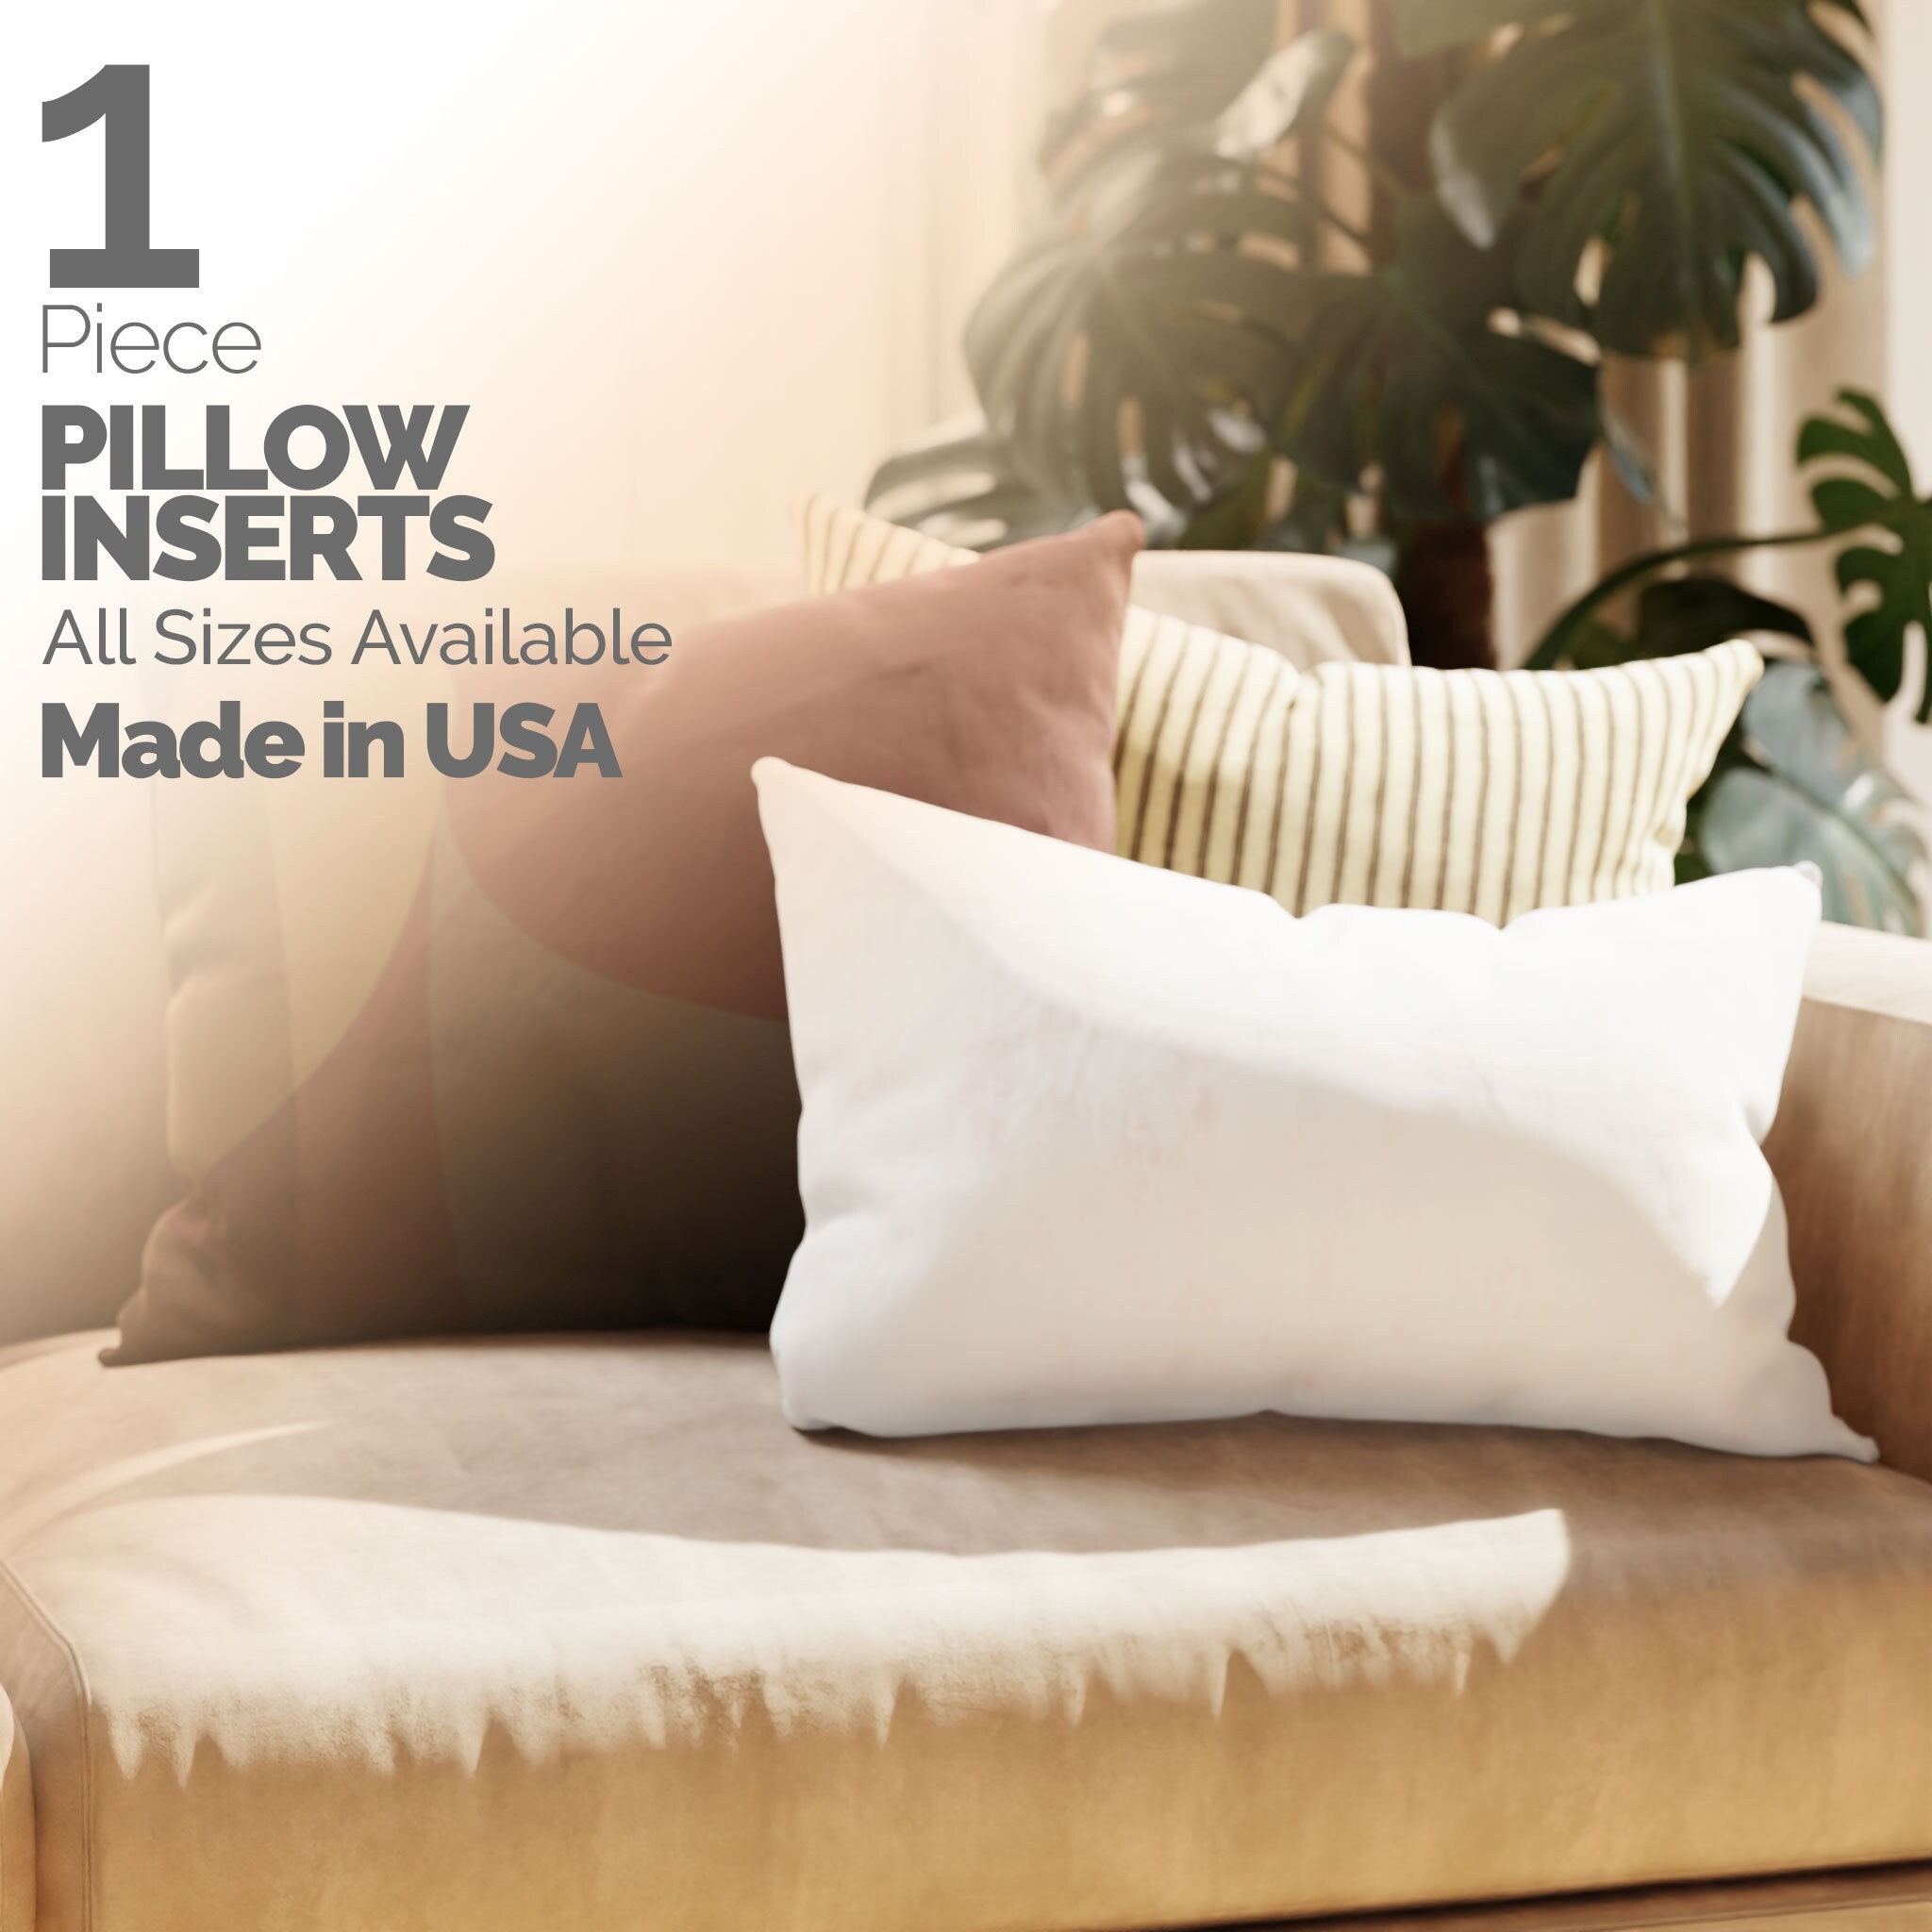 Poly Fil Weather Soft Indoor & Outdoor 20x20 Pillow Insert